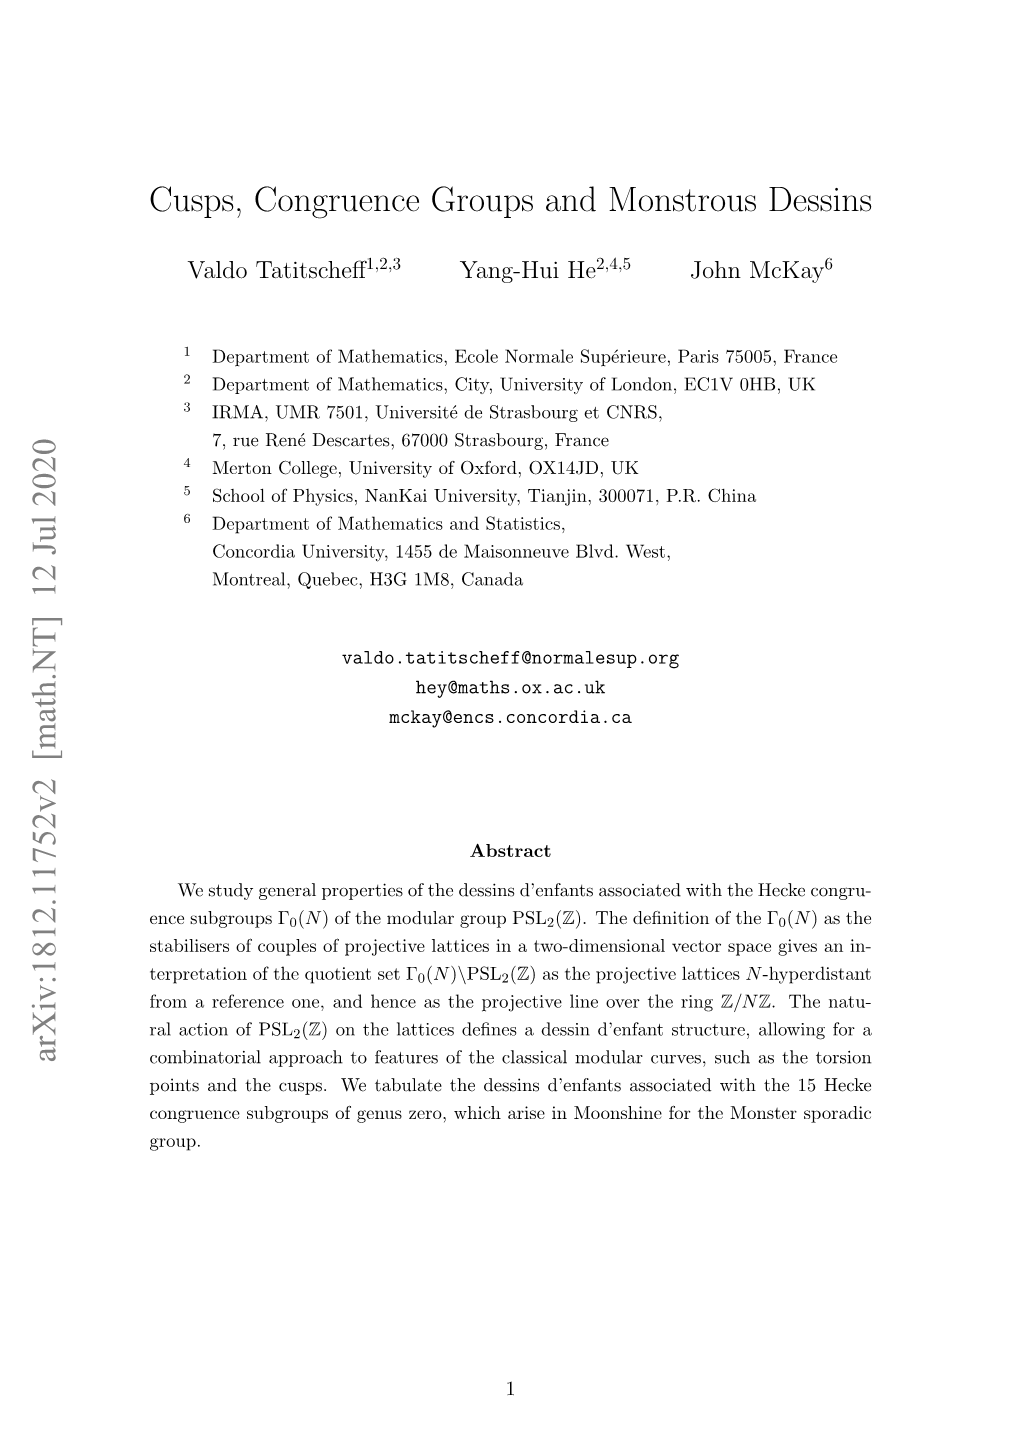 Cusps, Congruence Groups and Monstrous Dessins Arxiv:1812.11752V2 [Math.NT] 12 Jul 2020